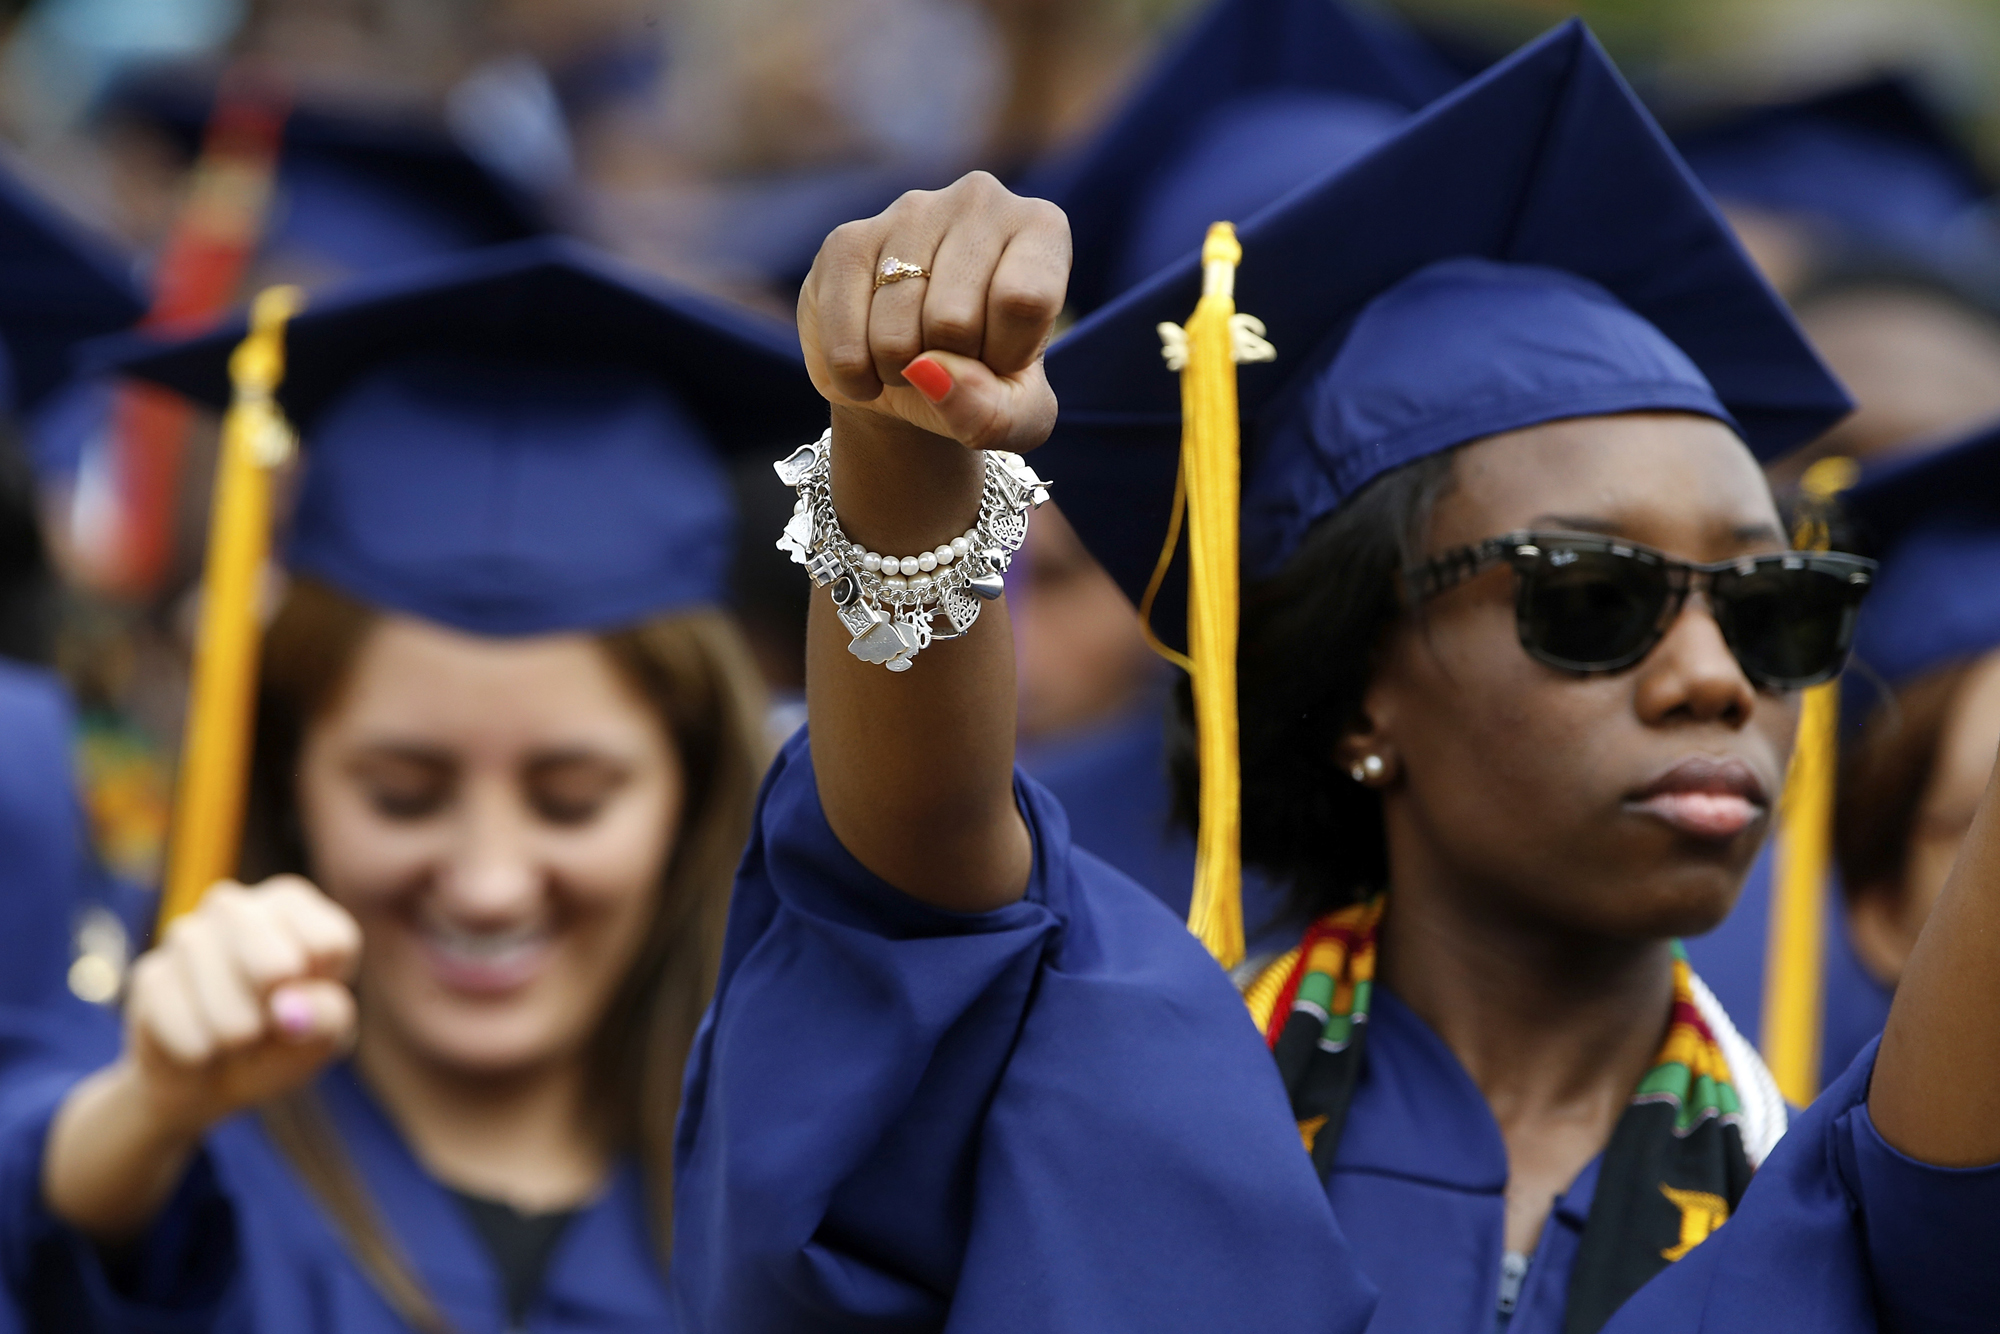 Graduates stand for the anthem "Lift Every Voice and Sing" during 2014 commencement ceremonies at Howard University in Washington May 10, 2014. (Jonathan Ernst—Reuters)